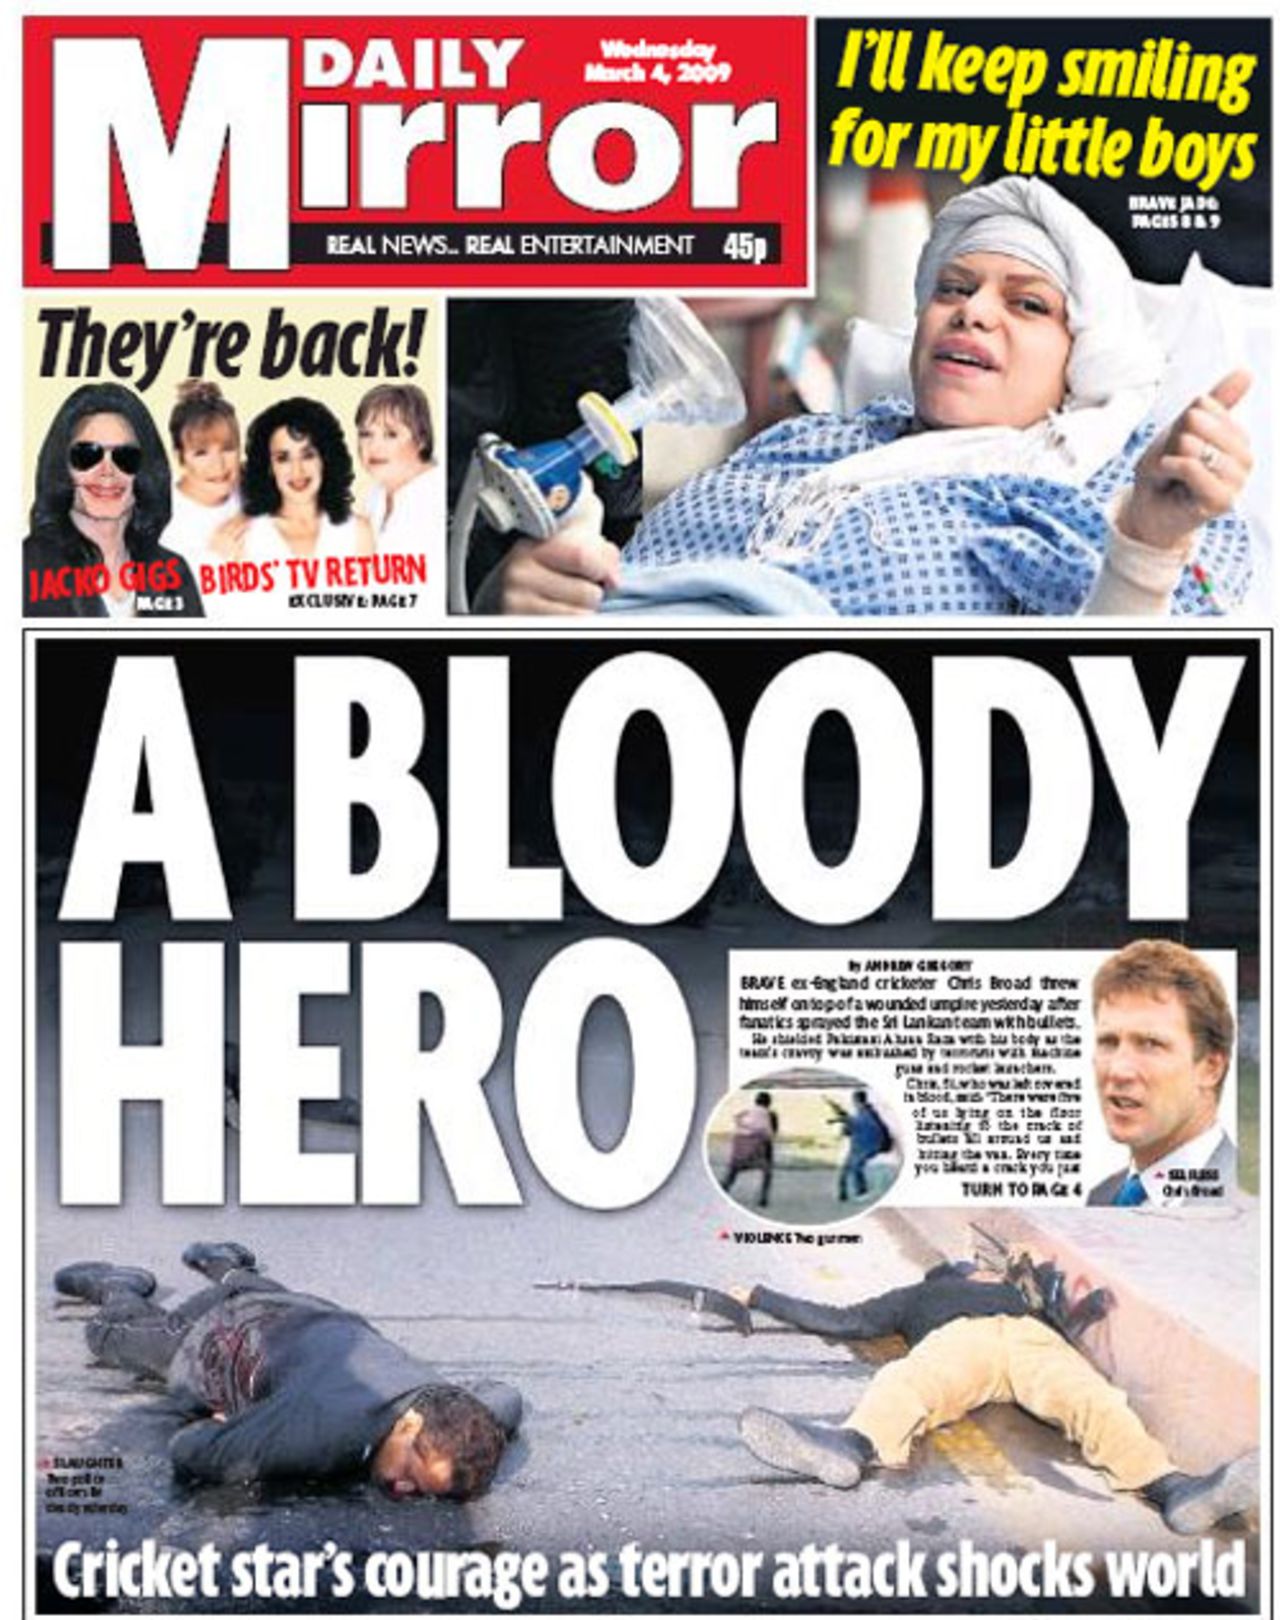 The <I>Daily Mirror</I> leads on the actions of Chris Broad during the Lahore terrorist attack, March 4, 2009